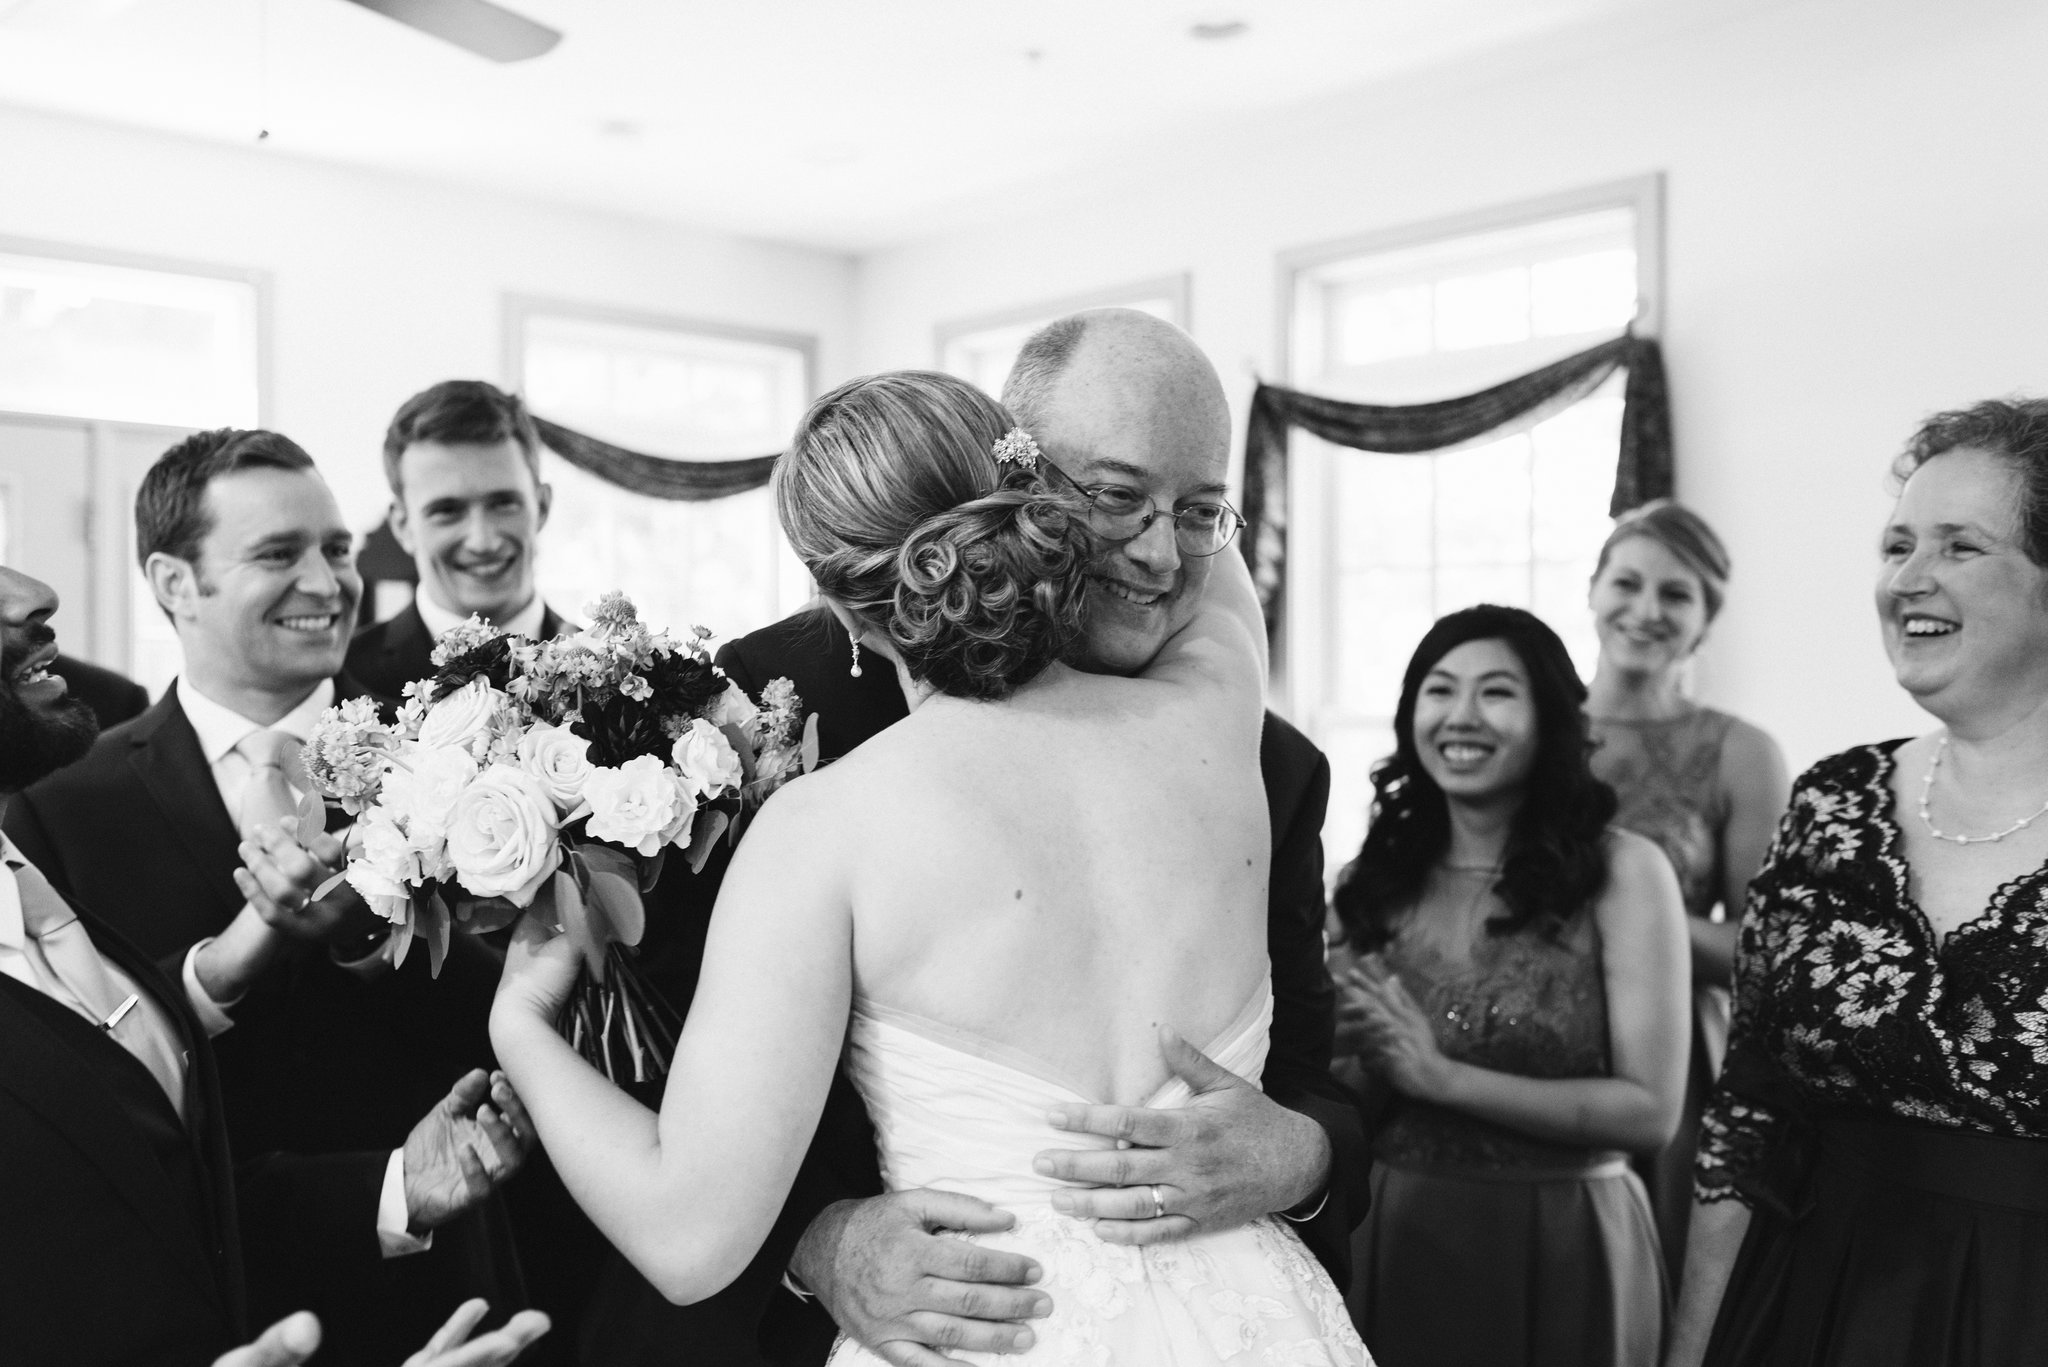  Ellicott City, Baltimore Wedding Photographer, Wayside Inn, Summer Wedding, Romantic, Traditional, Bride Hugging Father of the Bride, Allison Harper and Co Hair, Black and White Photo 